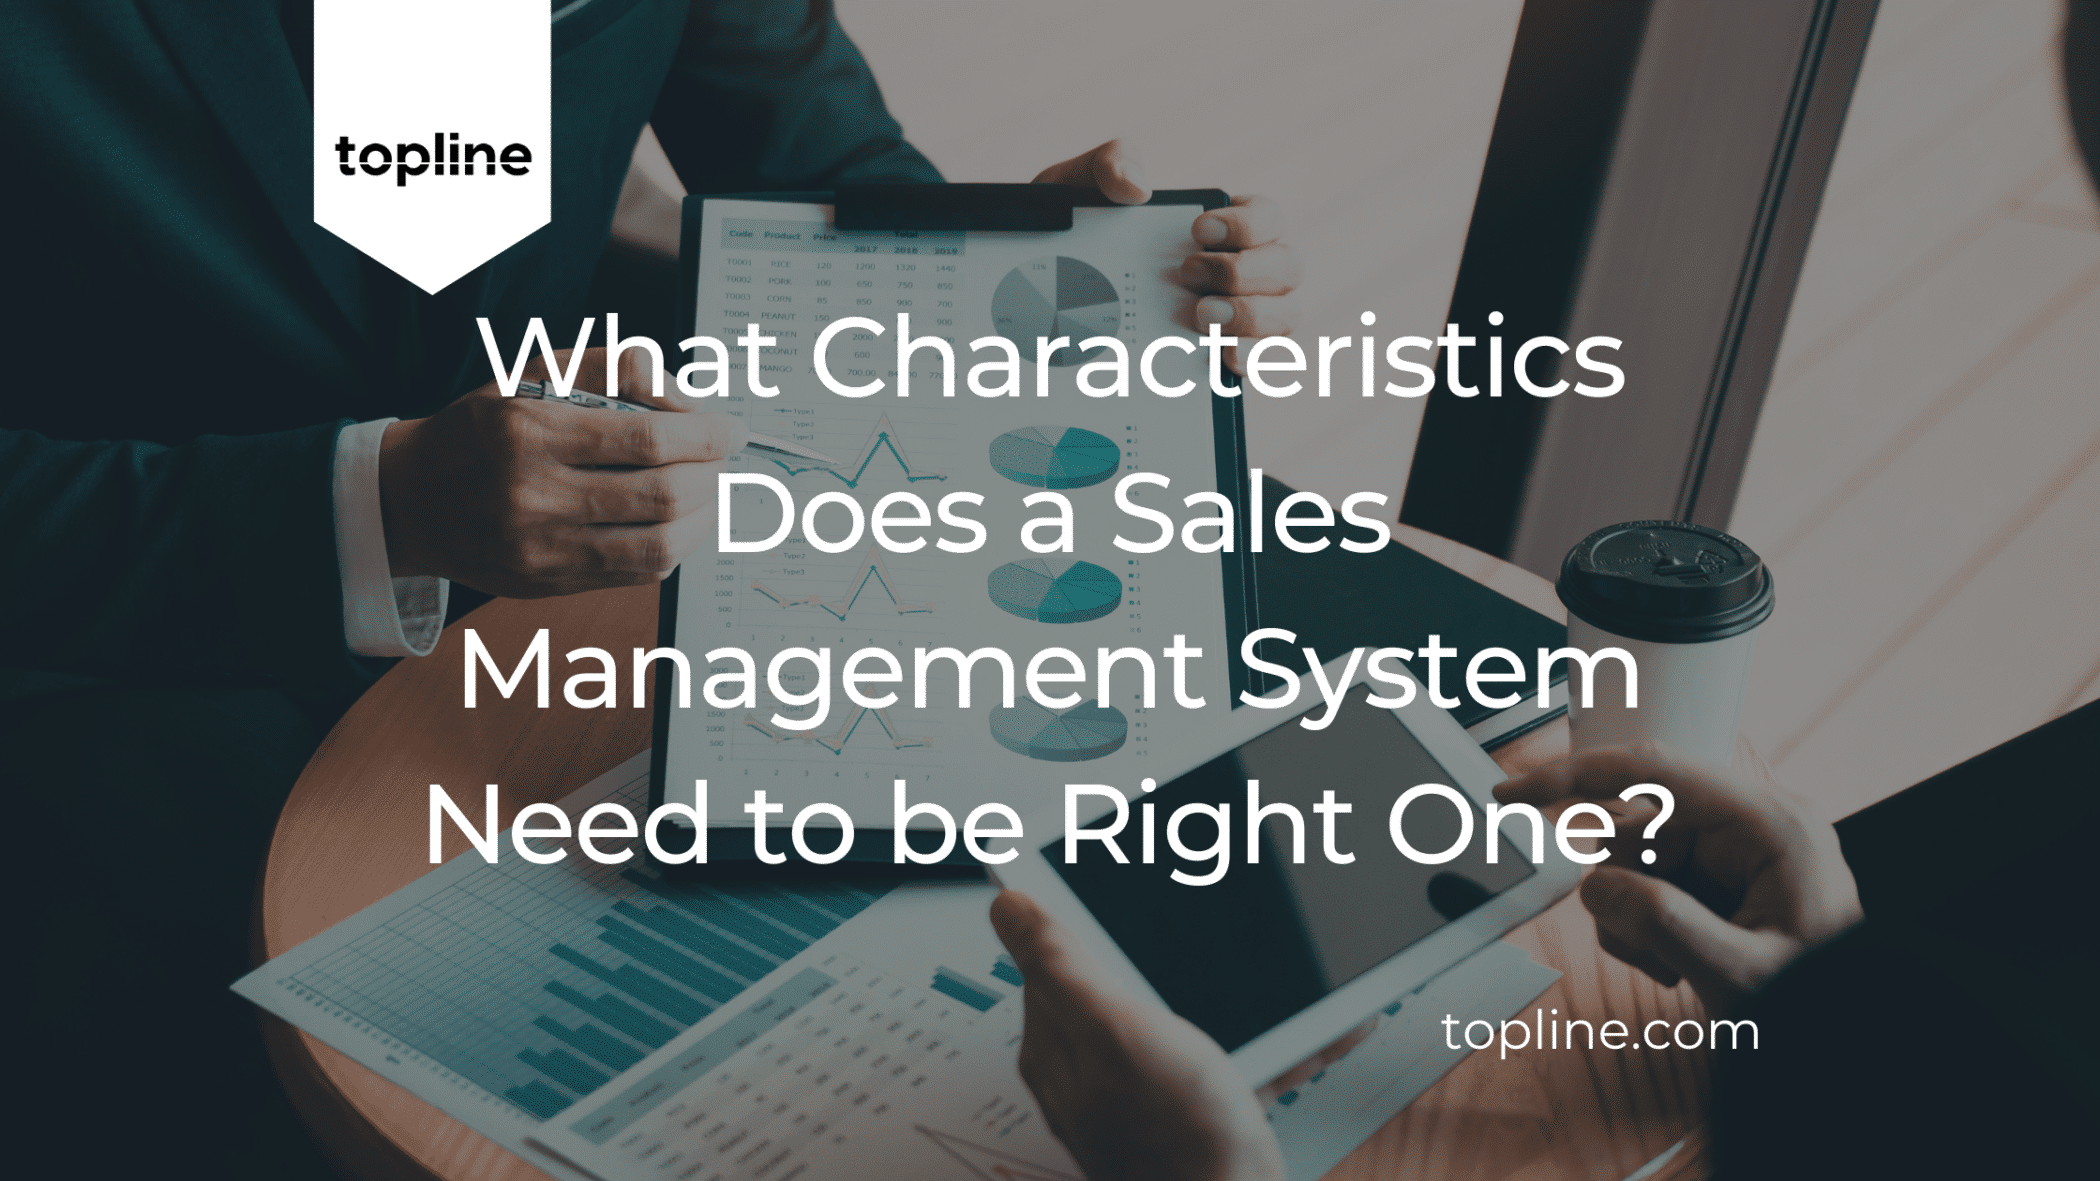 What Characteristics Does a Sales Management System Need to be Right One?